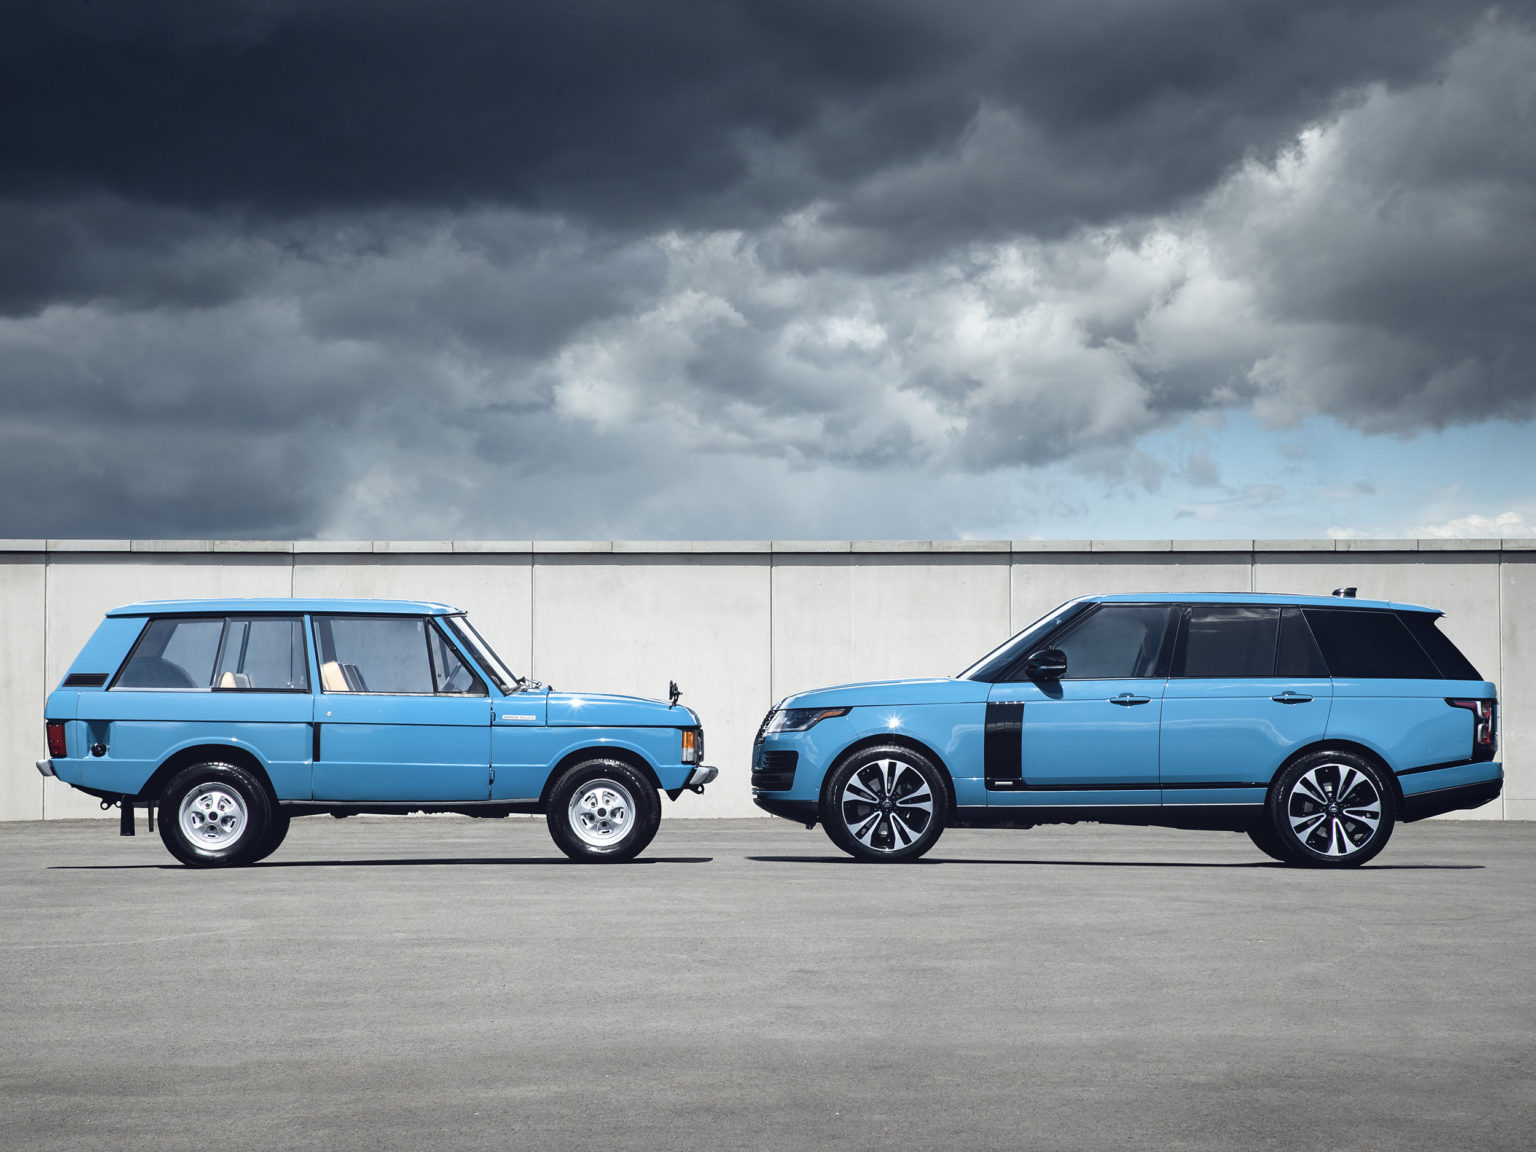 It's been 50 years since the Land Rover Range Rover made its debut.